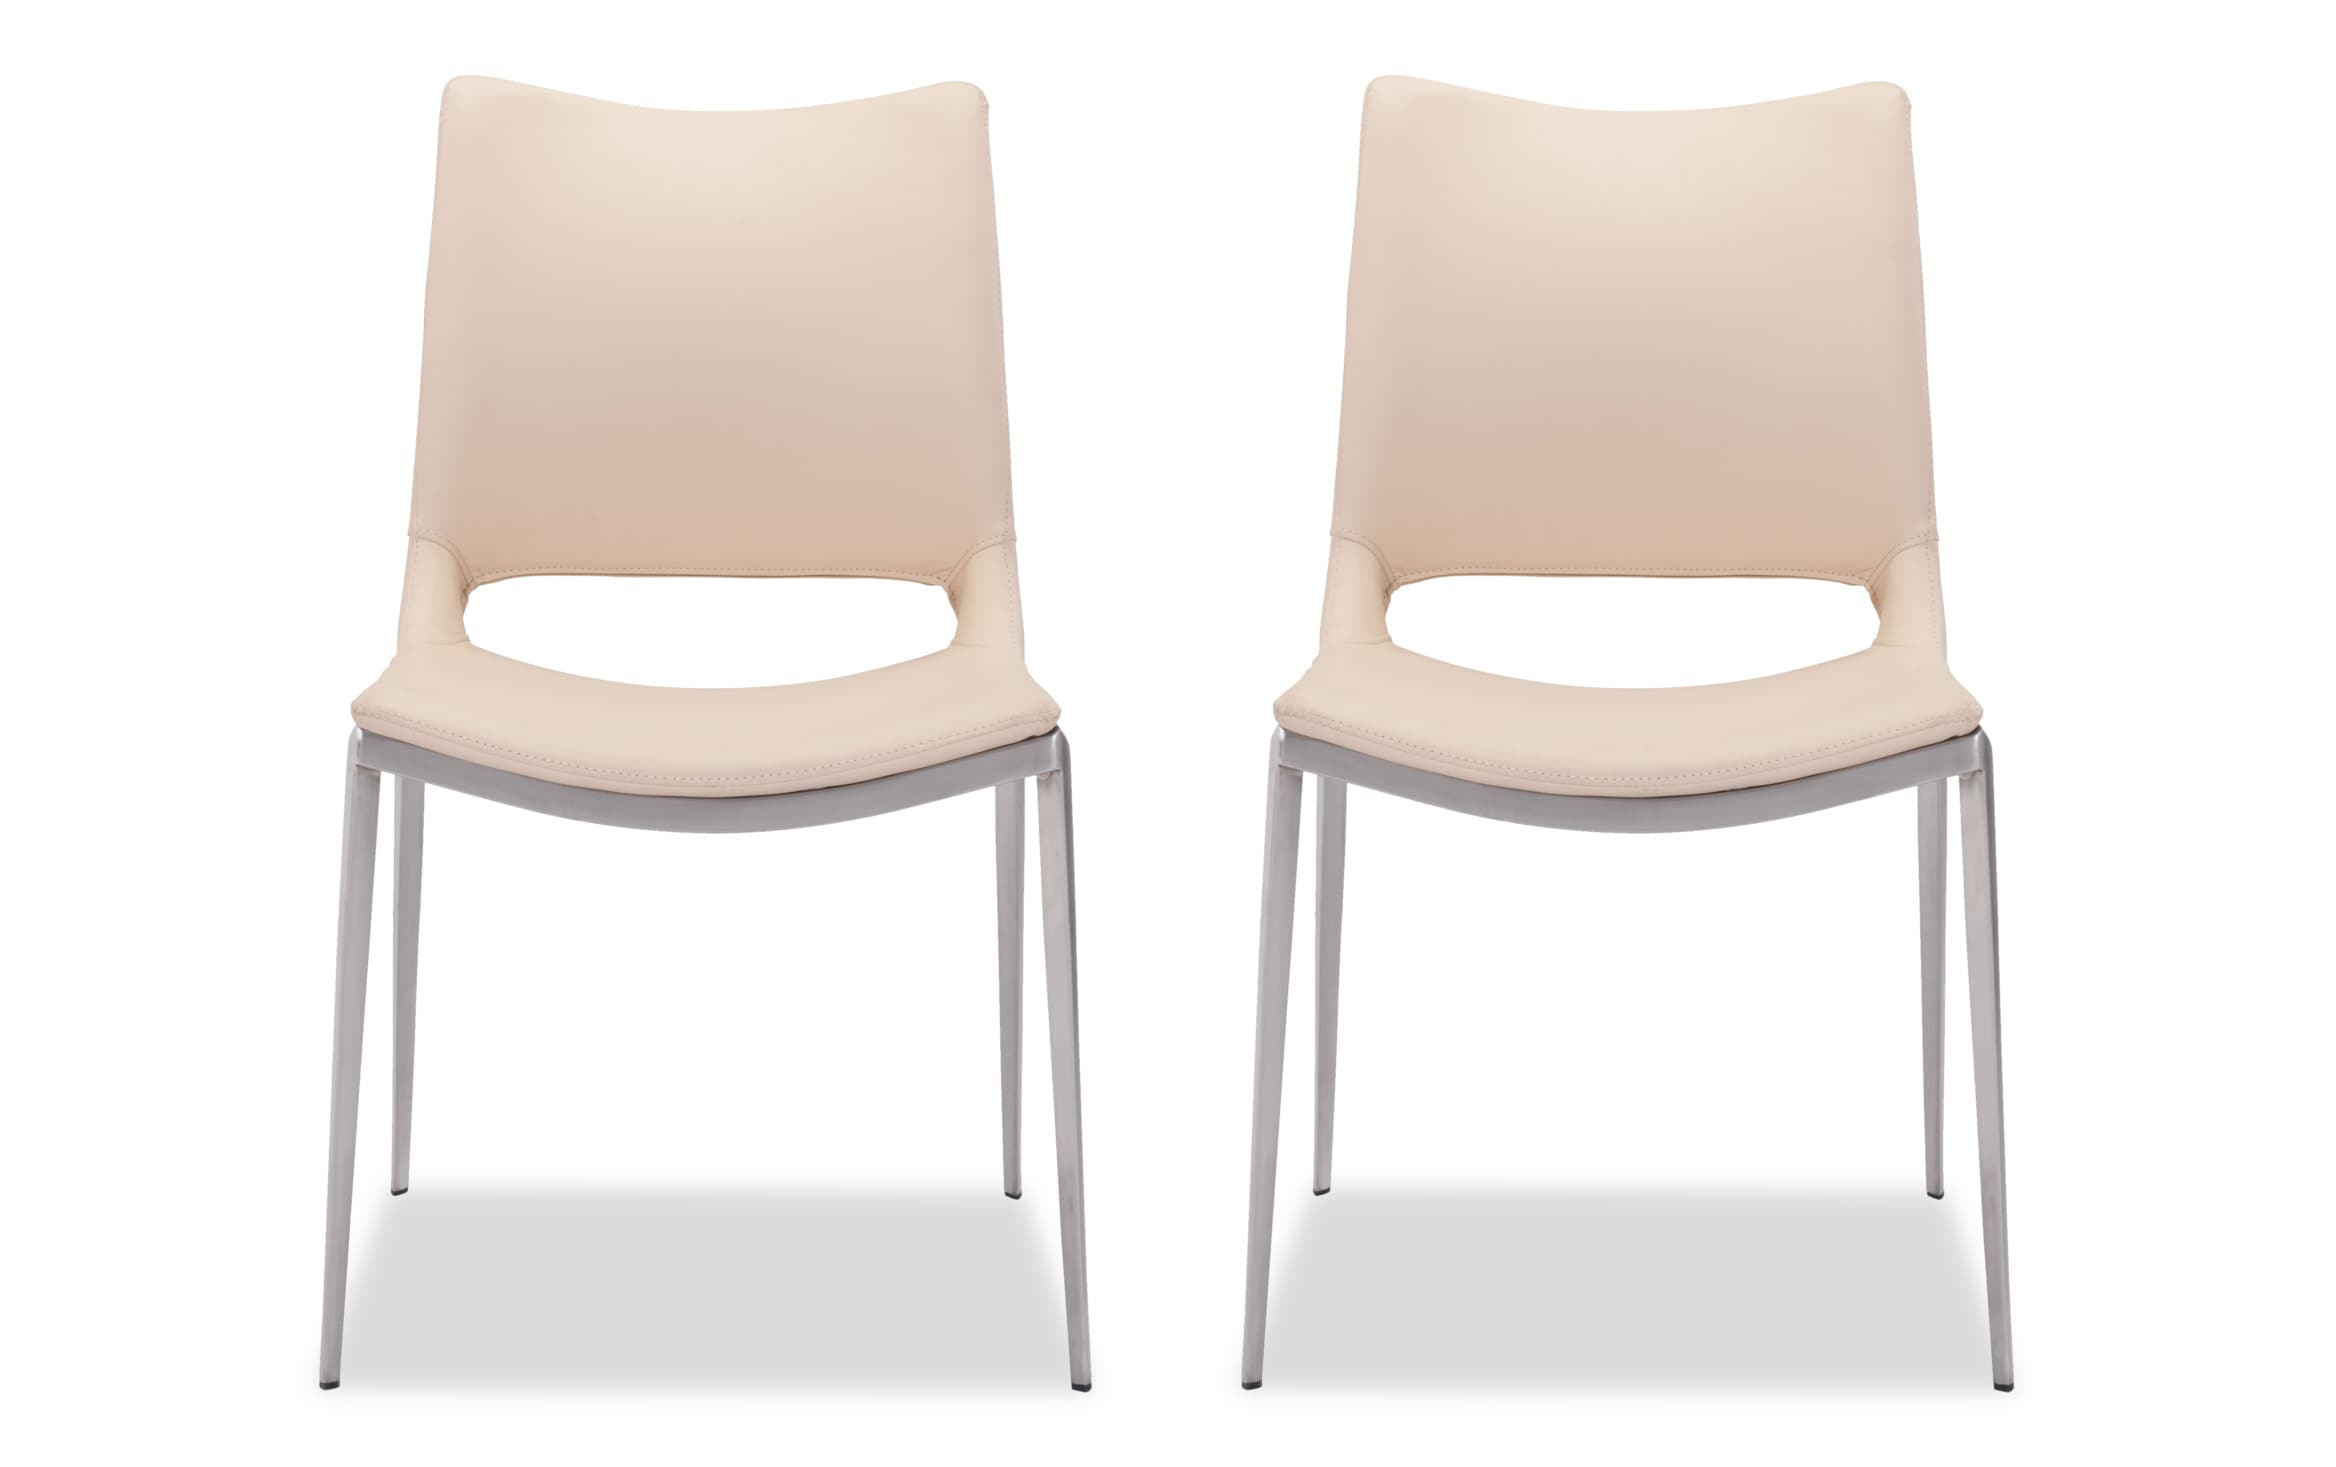 Set Of 2 Cally Light Pink Dining Chairs, Light Pink Dining Room Chairs